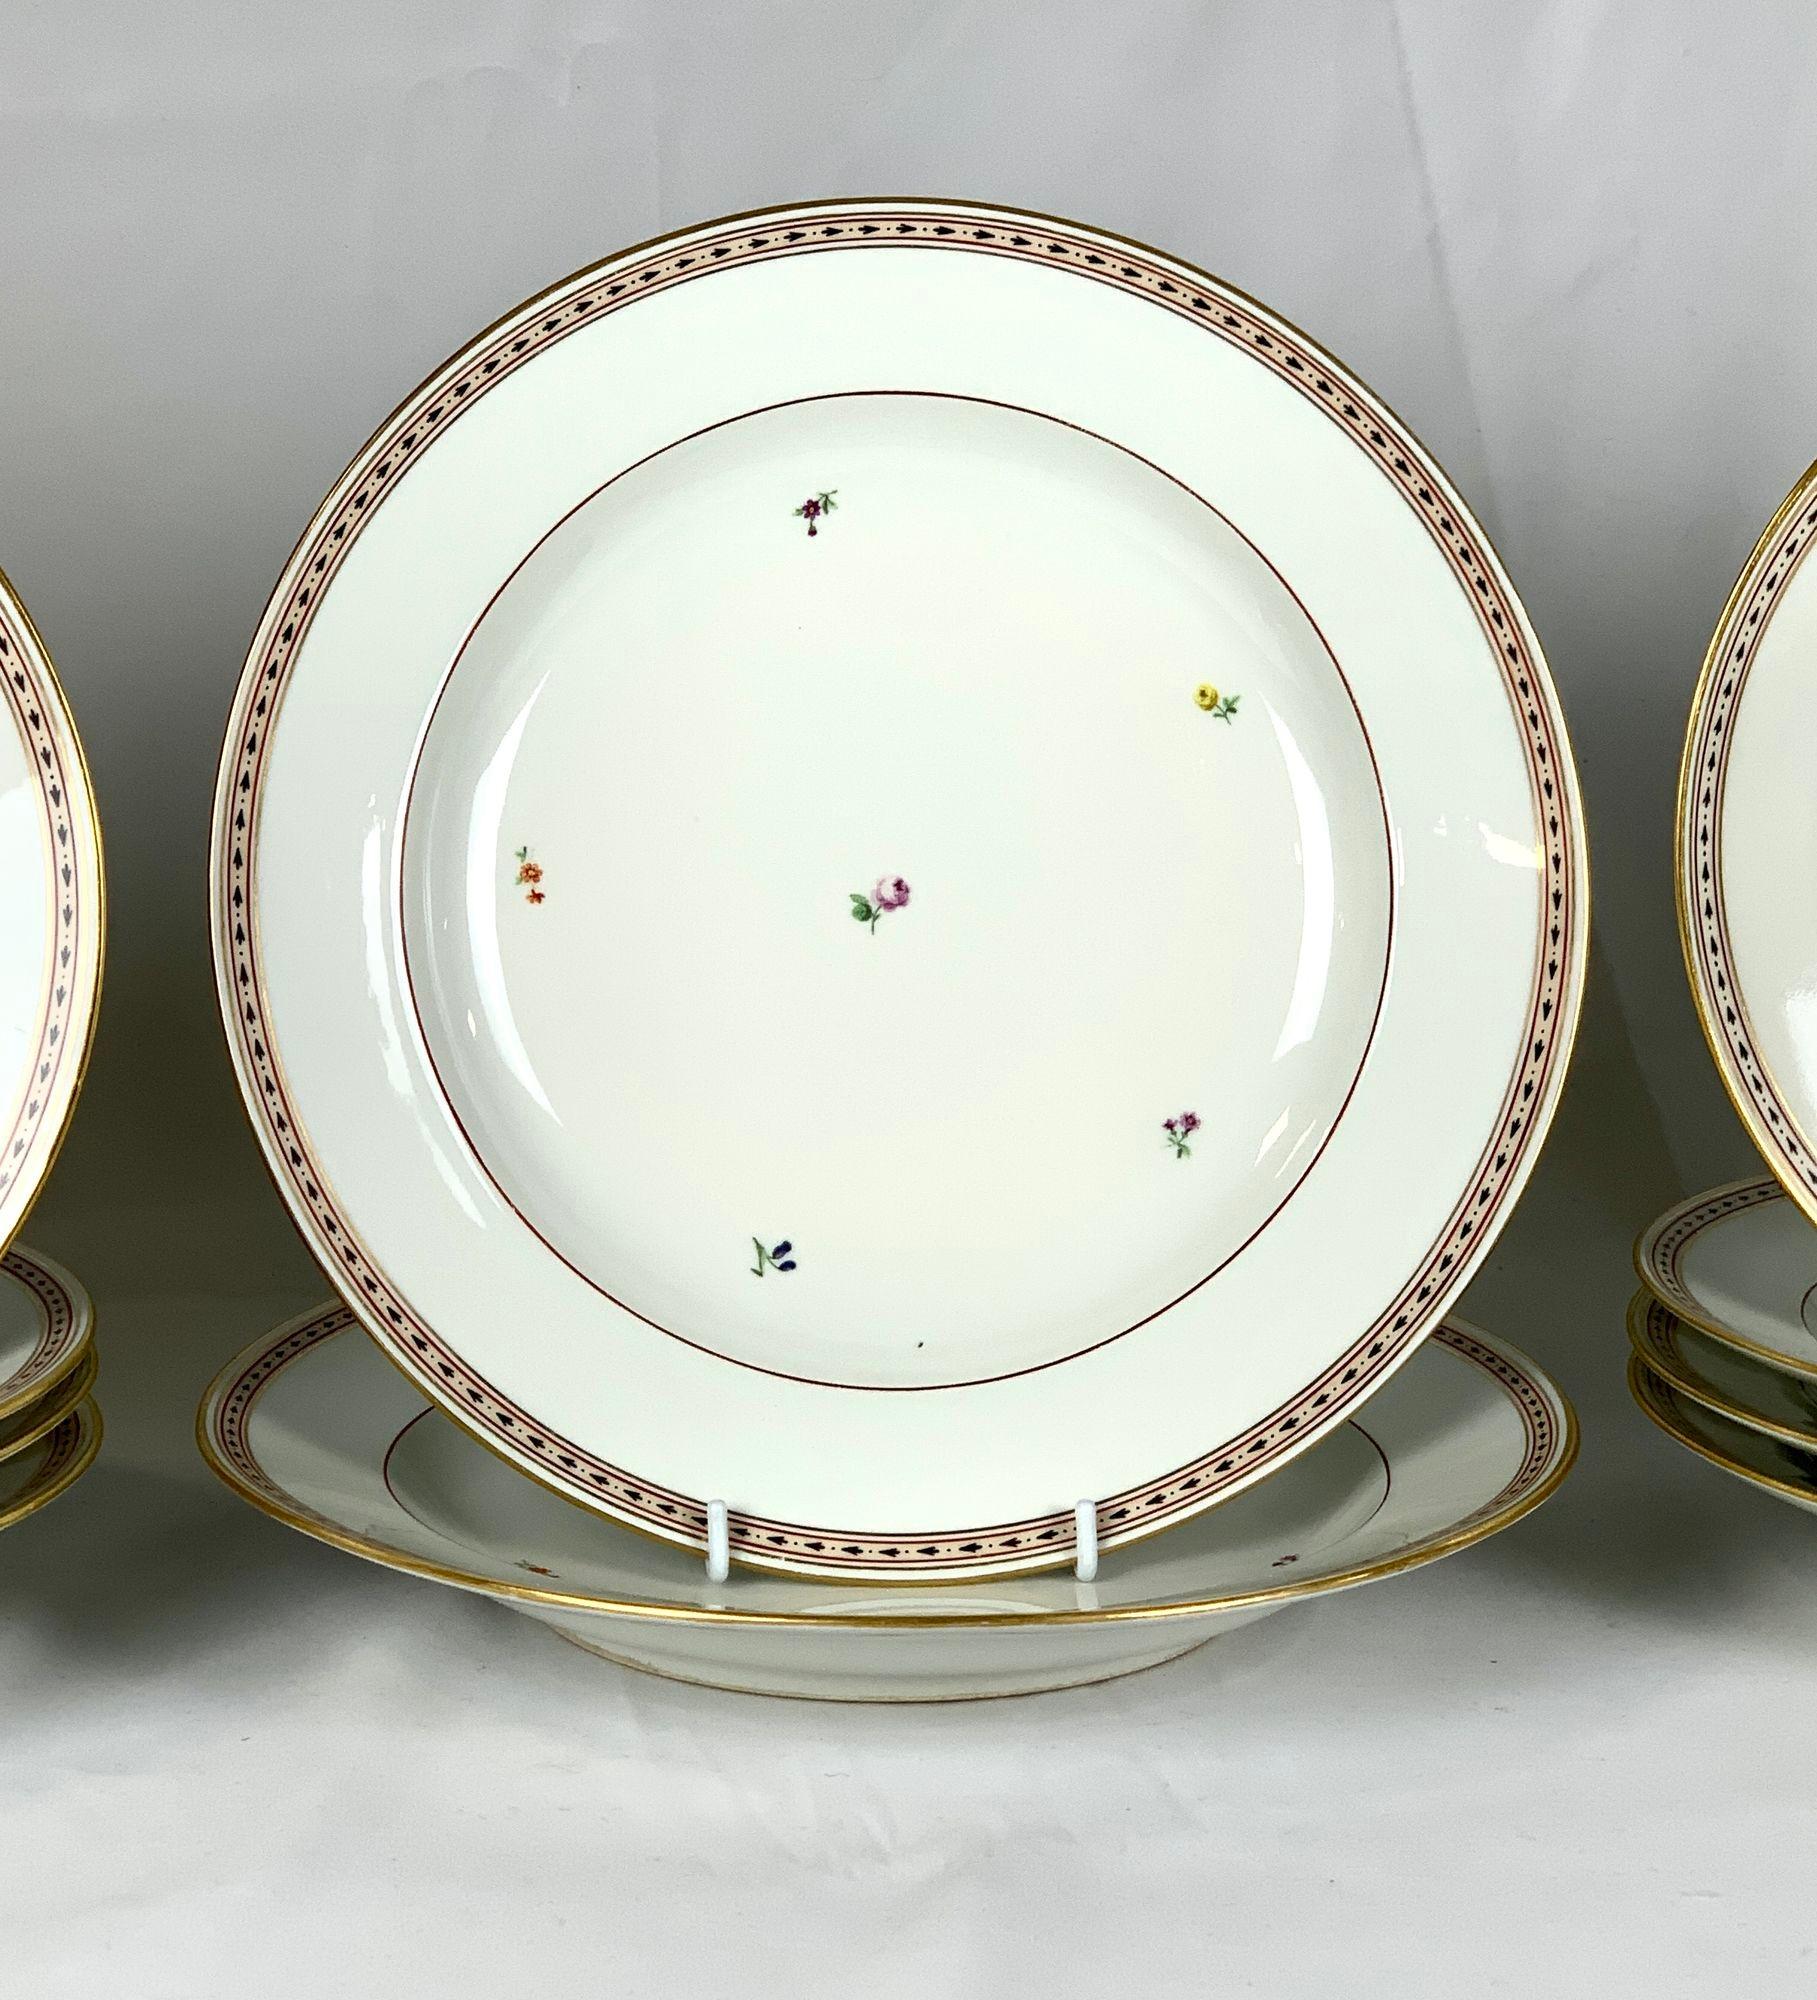 18th Century Imperial Vienna Porcelain Set of 4 Dinner 4 Soup Dishes 2 Chargers  In Excellent Condition For Sale In Katonah, NY